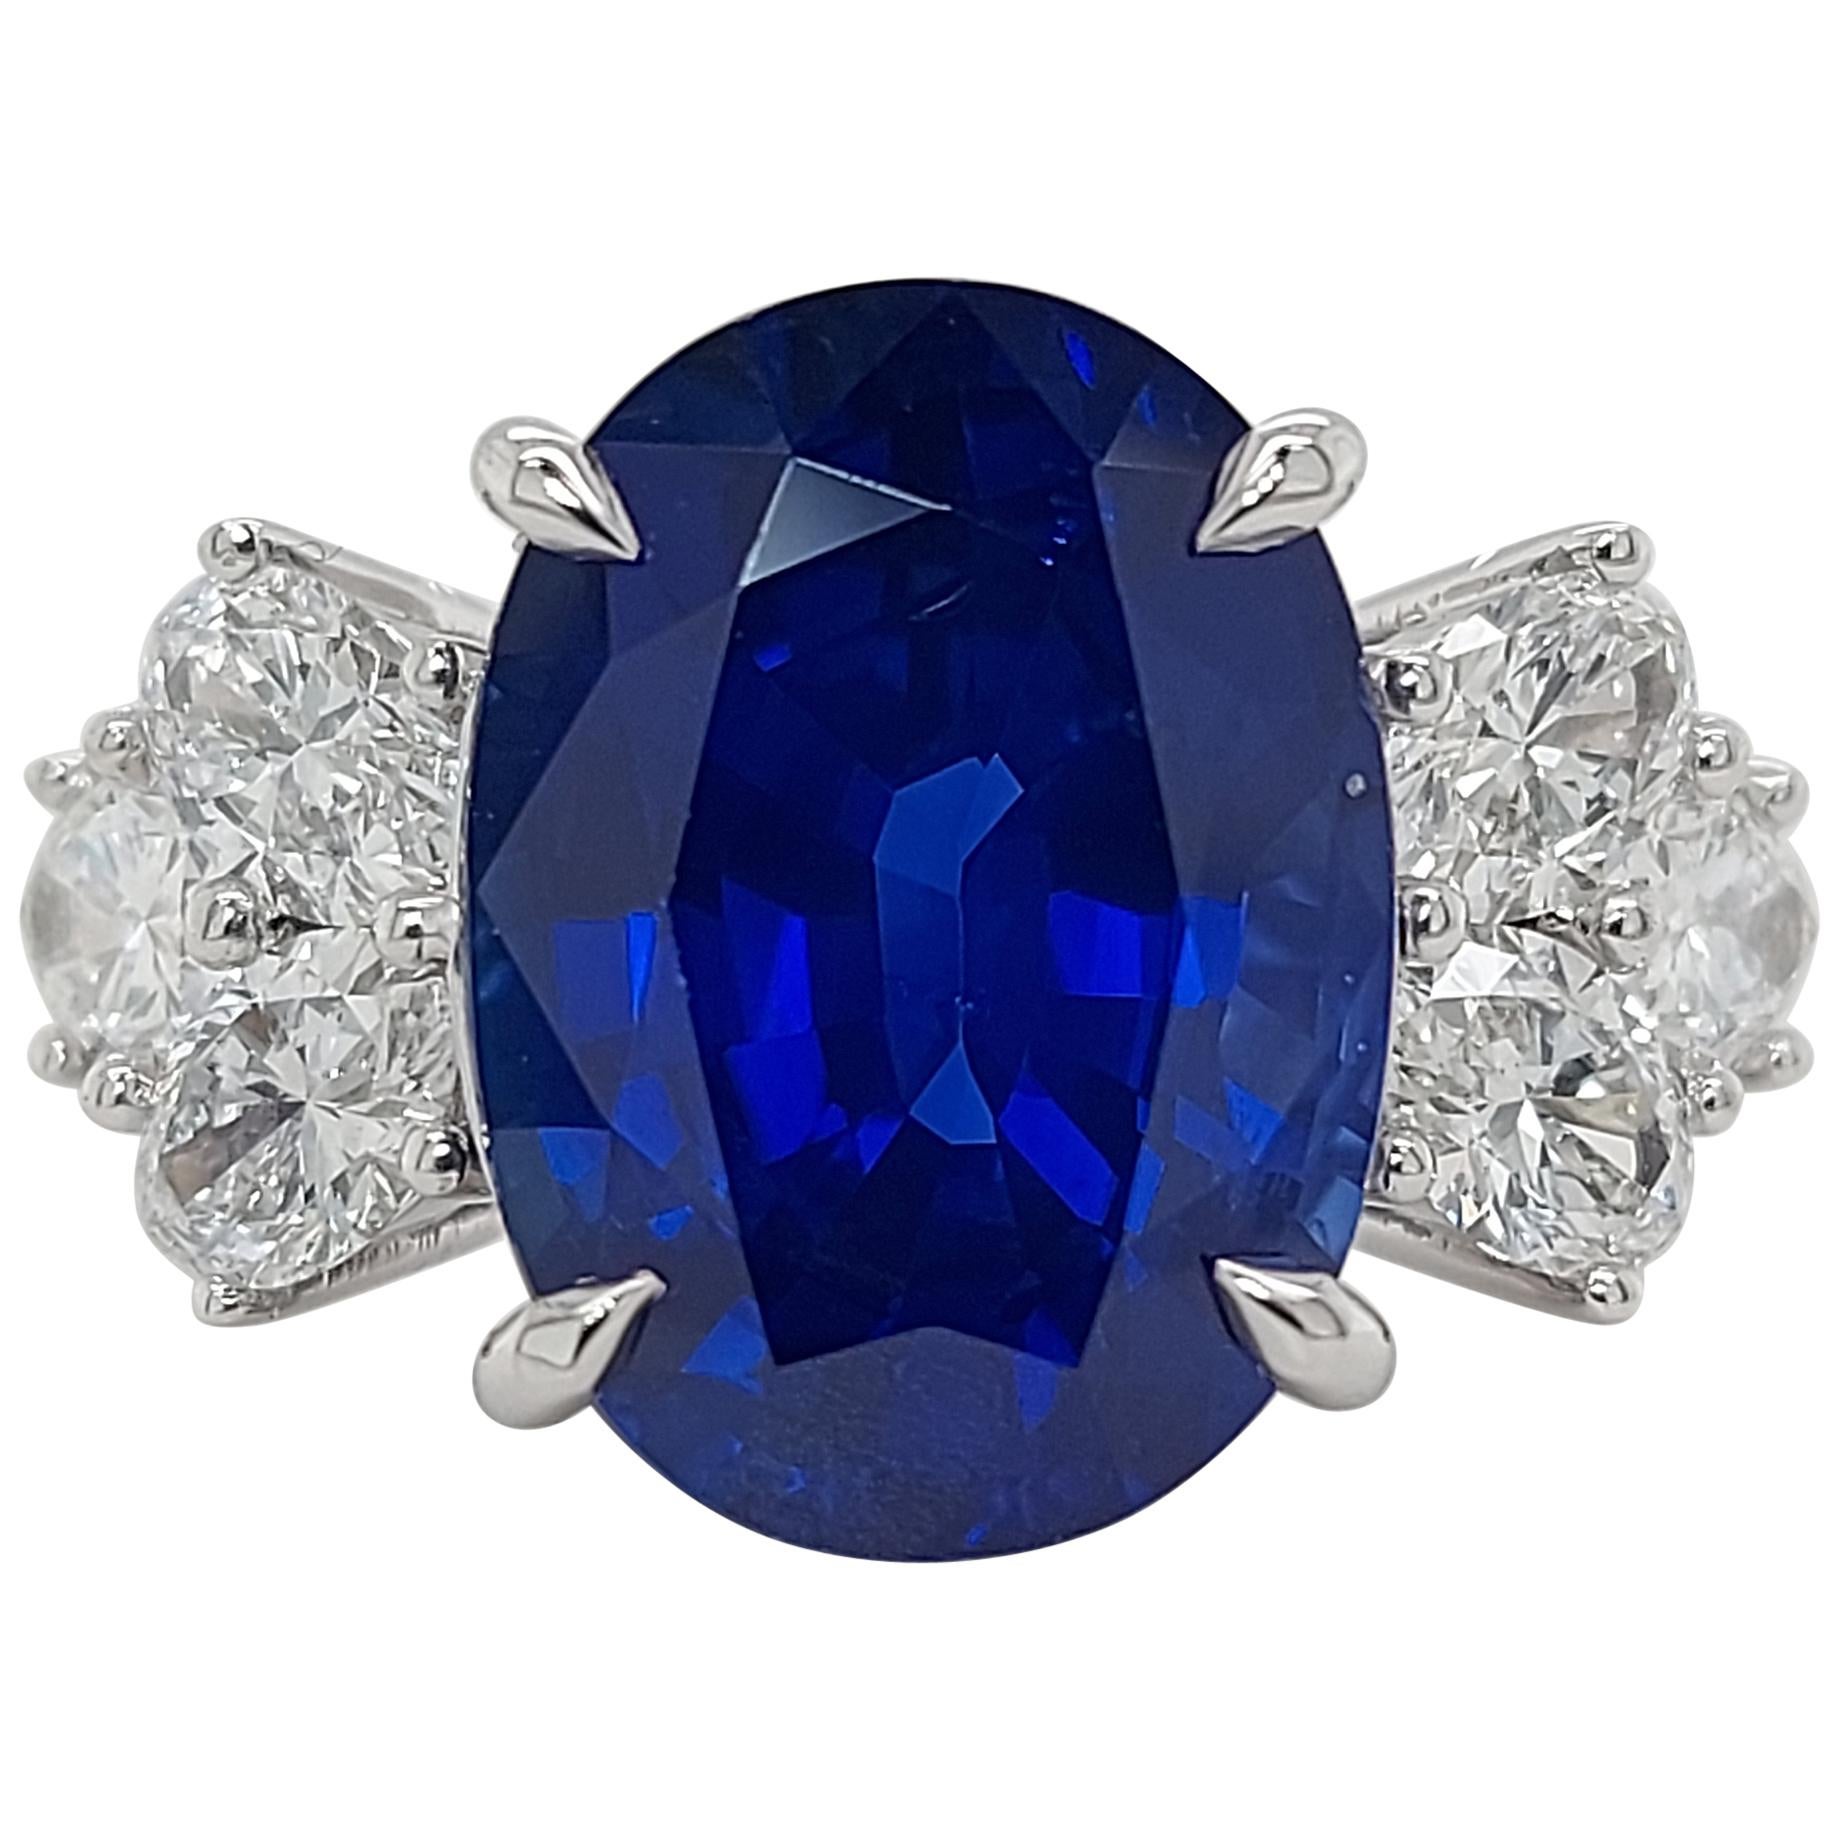 18 Karat White Gold Ring Set with a 7 Carat Sapphire and Diamonds